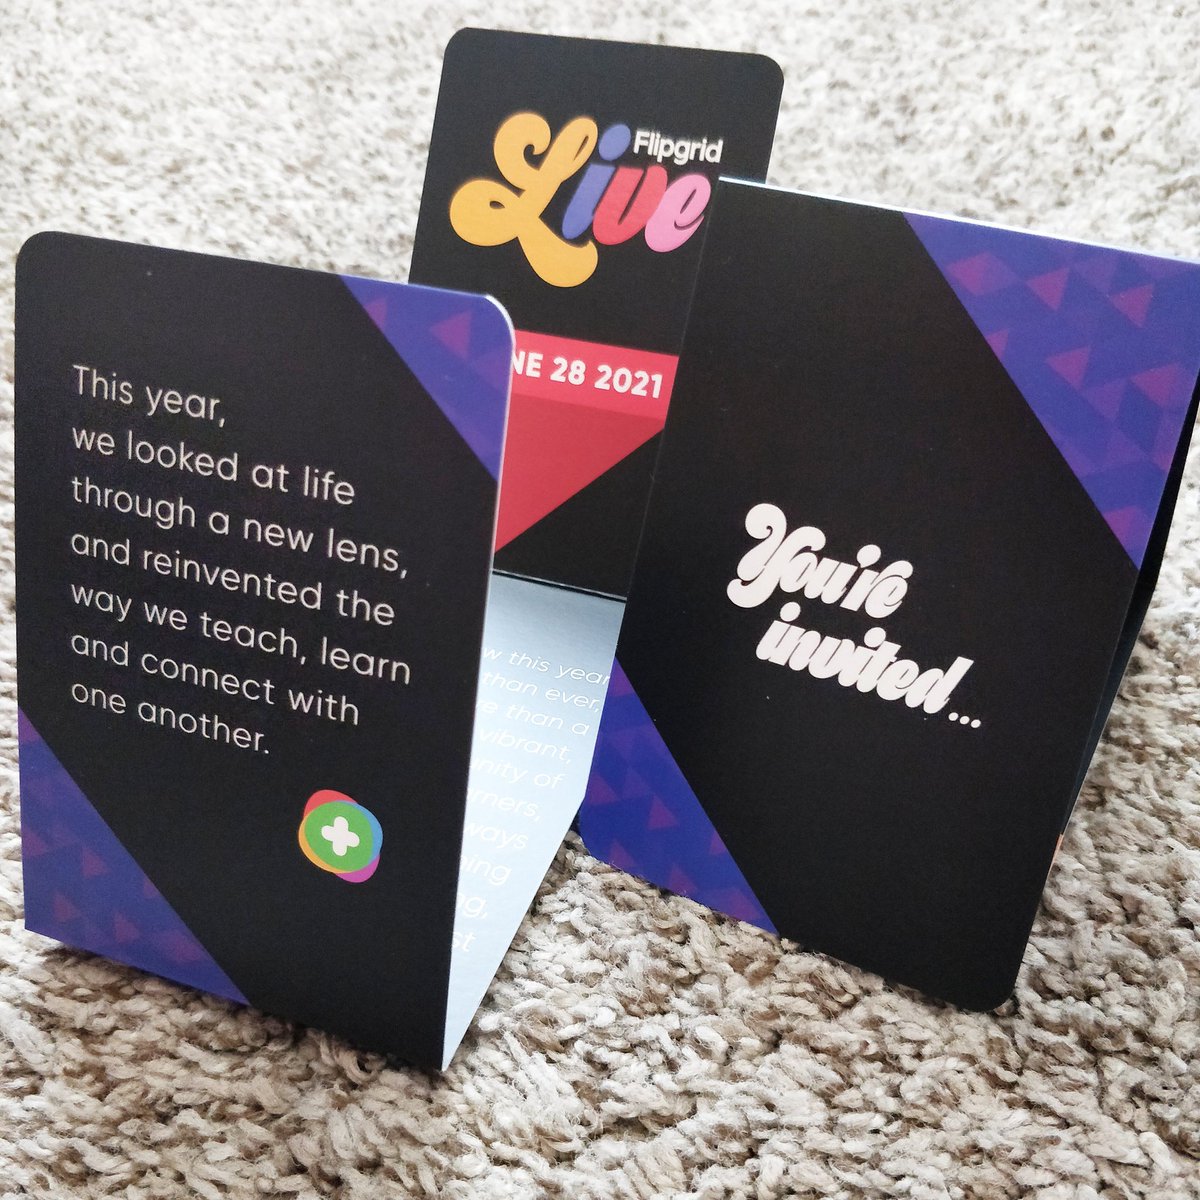 We are officially invited to #FlipgridLIVE 2021! 🚀

Who is joining us on June 28th? 💚

👉🏼 aka.ms/FlipgridLIVE 👈🏼

#eTwinz 👥